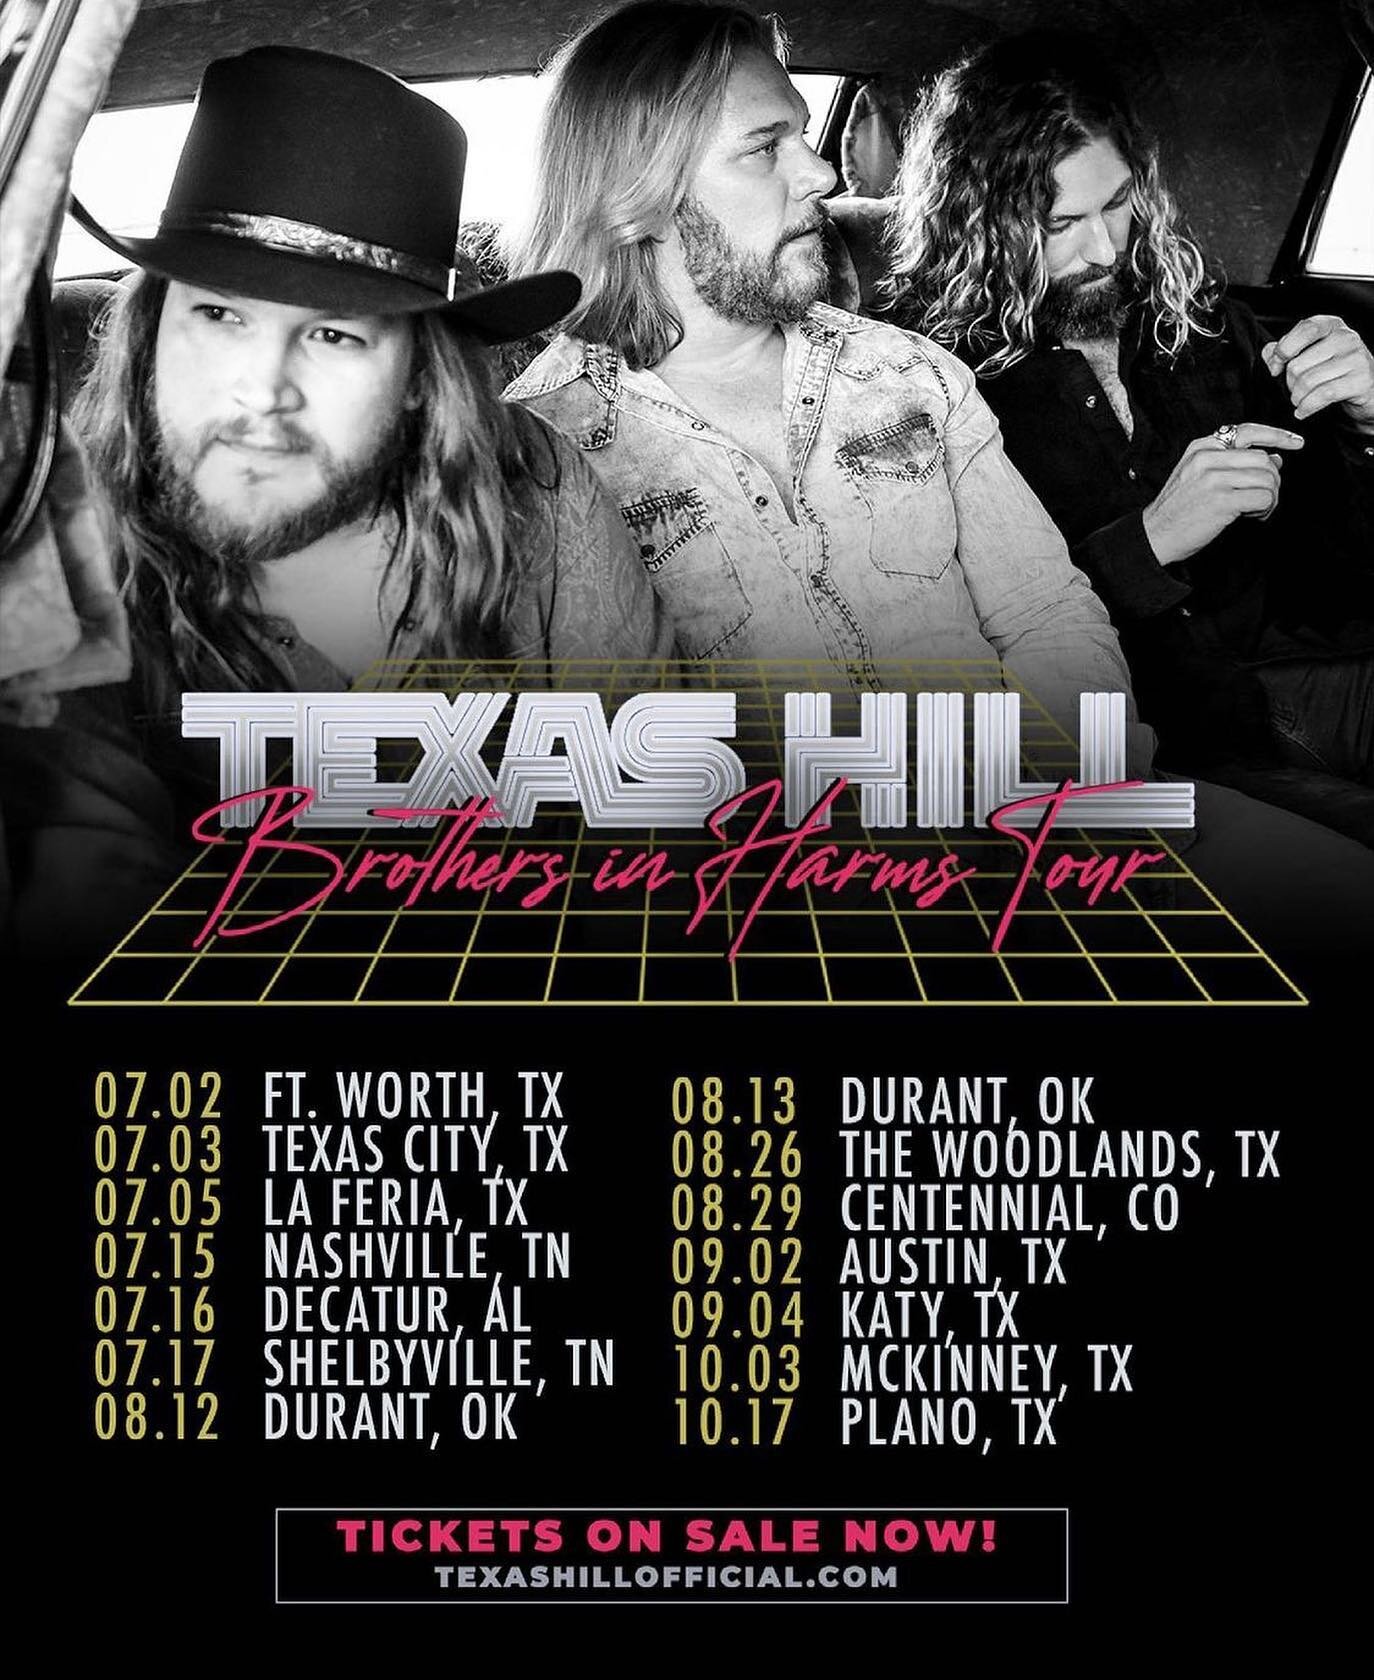 Heading home for the weekend! Starting in Fort Worth! Who's coming?! @texashillofficial 
.
.
What are some of y'all's favorite venues you'd like to see us okay? 🤟🏼